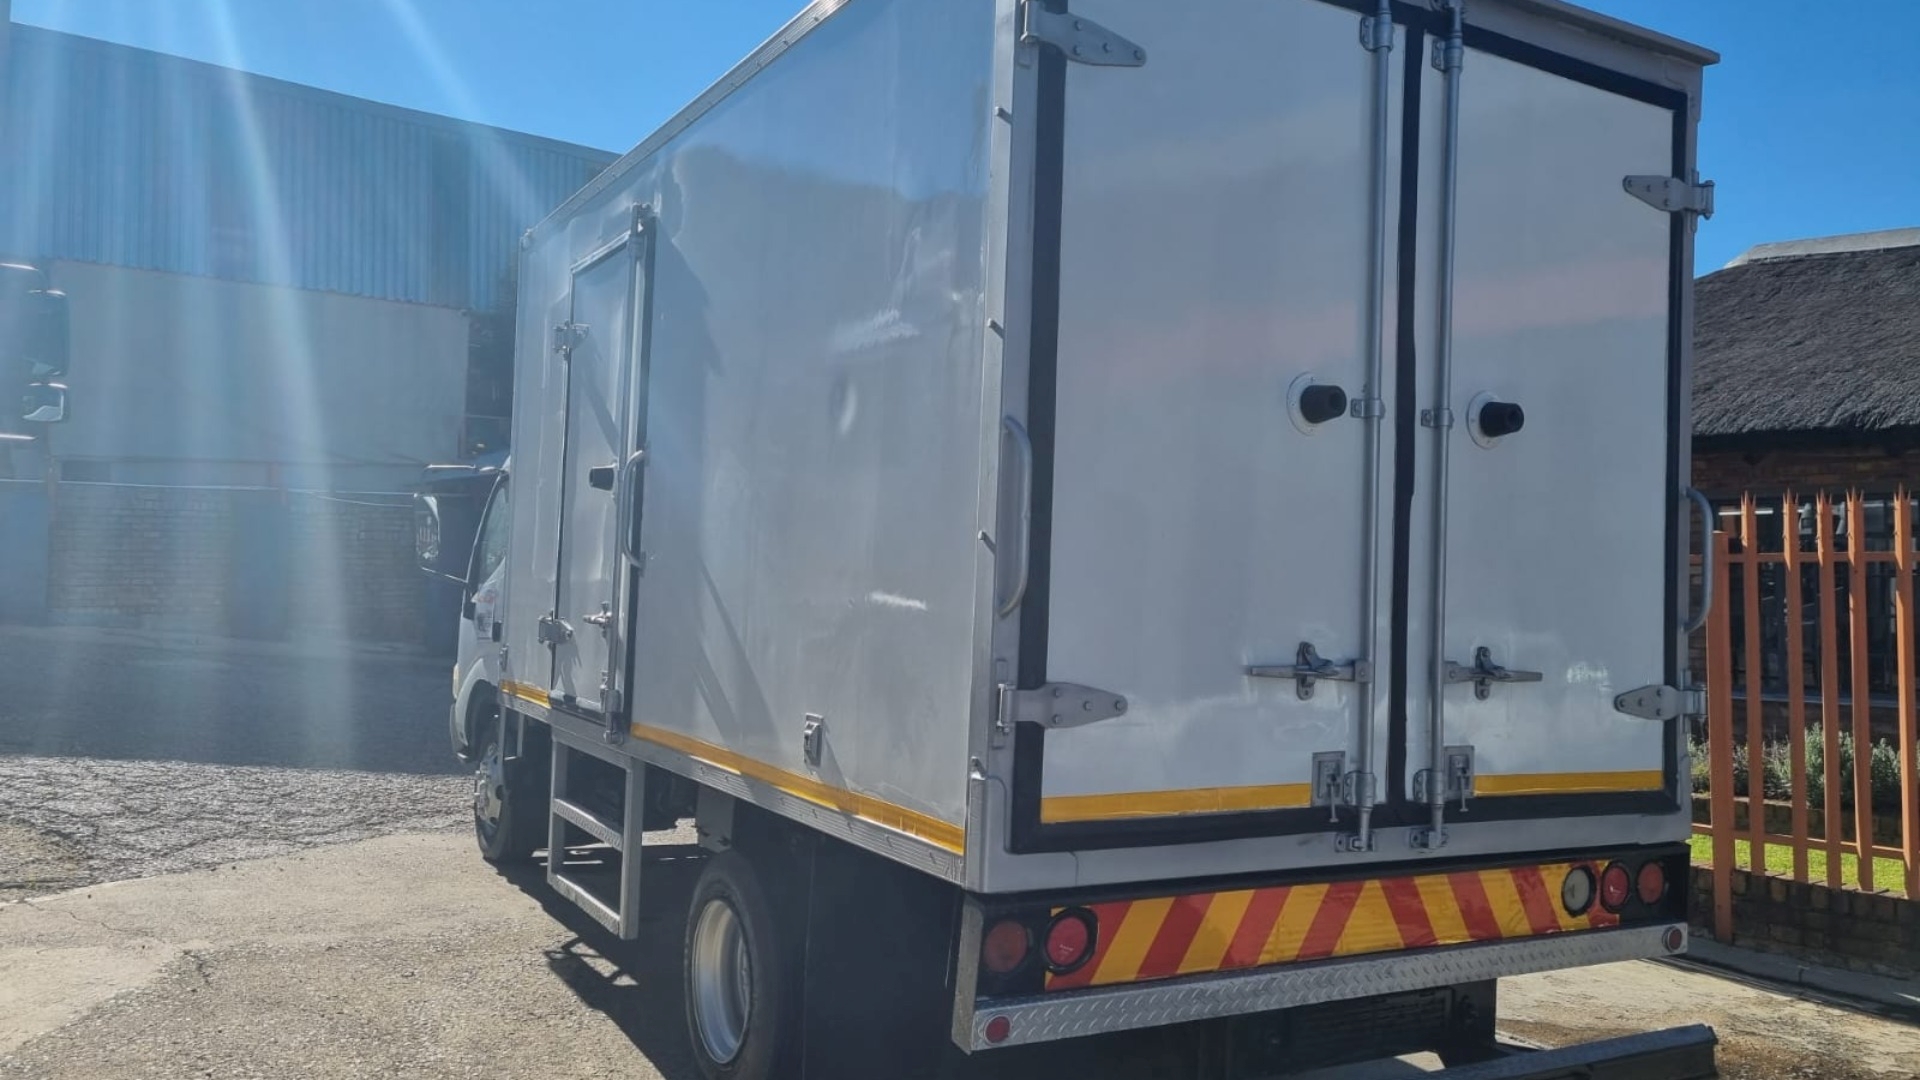 Hino Refrigerated trucks 814 4.5 TON 2012 for sale by A to Z TRUCK SALES | Truck & Trailer Marketplace